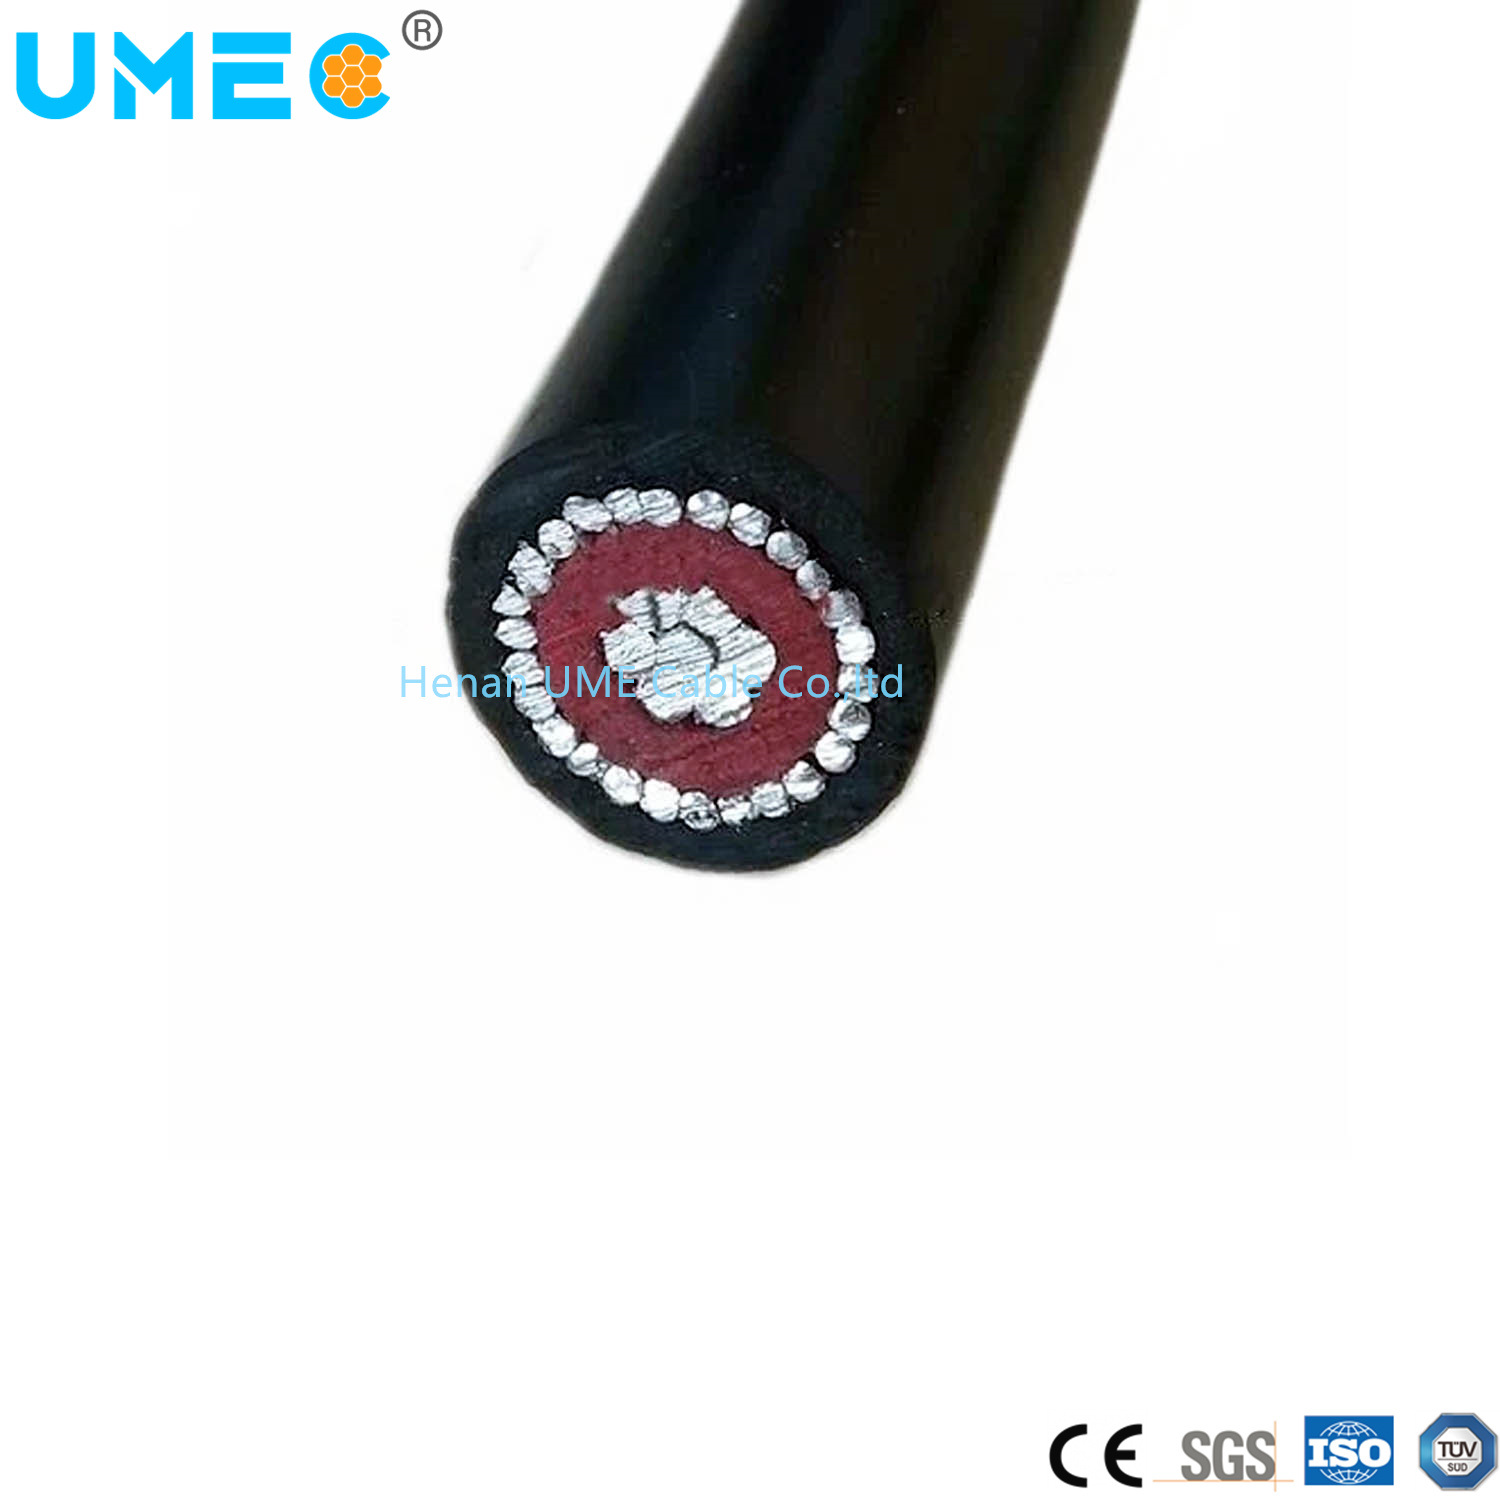 Power Electric Cable Aerial Service Concentric with Pilot Communication Wire Sne Cne Airdac Cable Electrical Pilot Cables